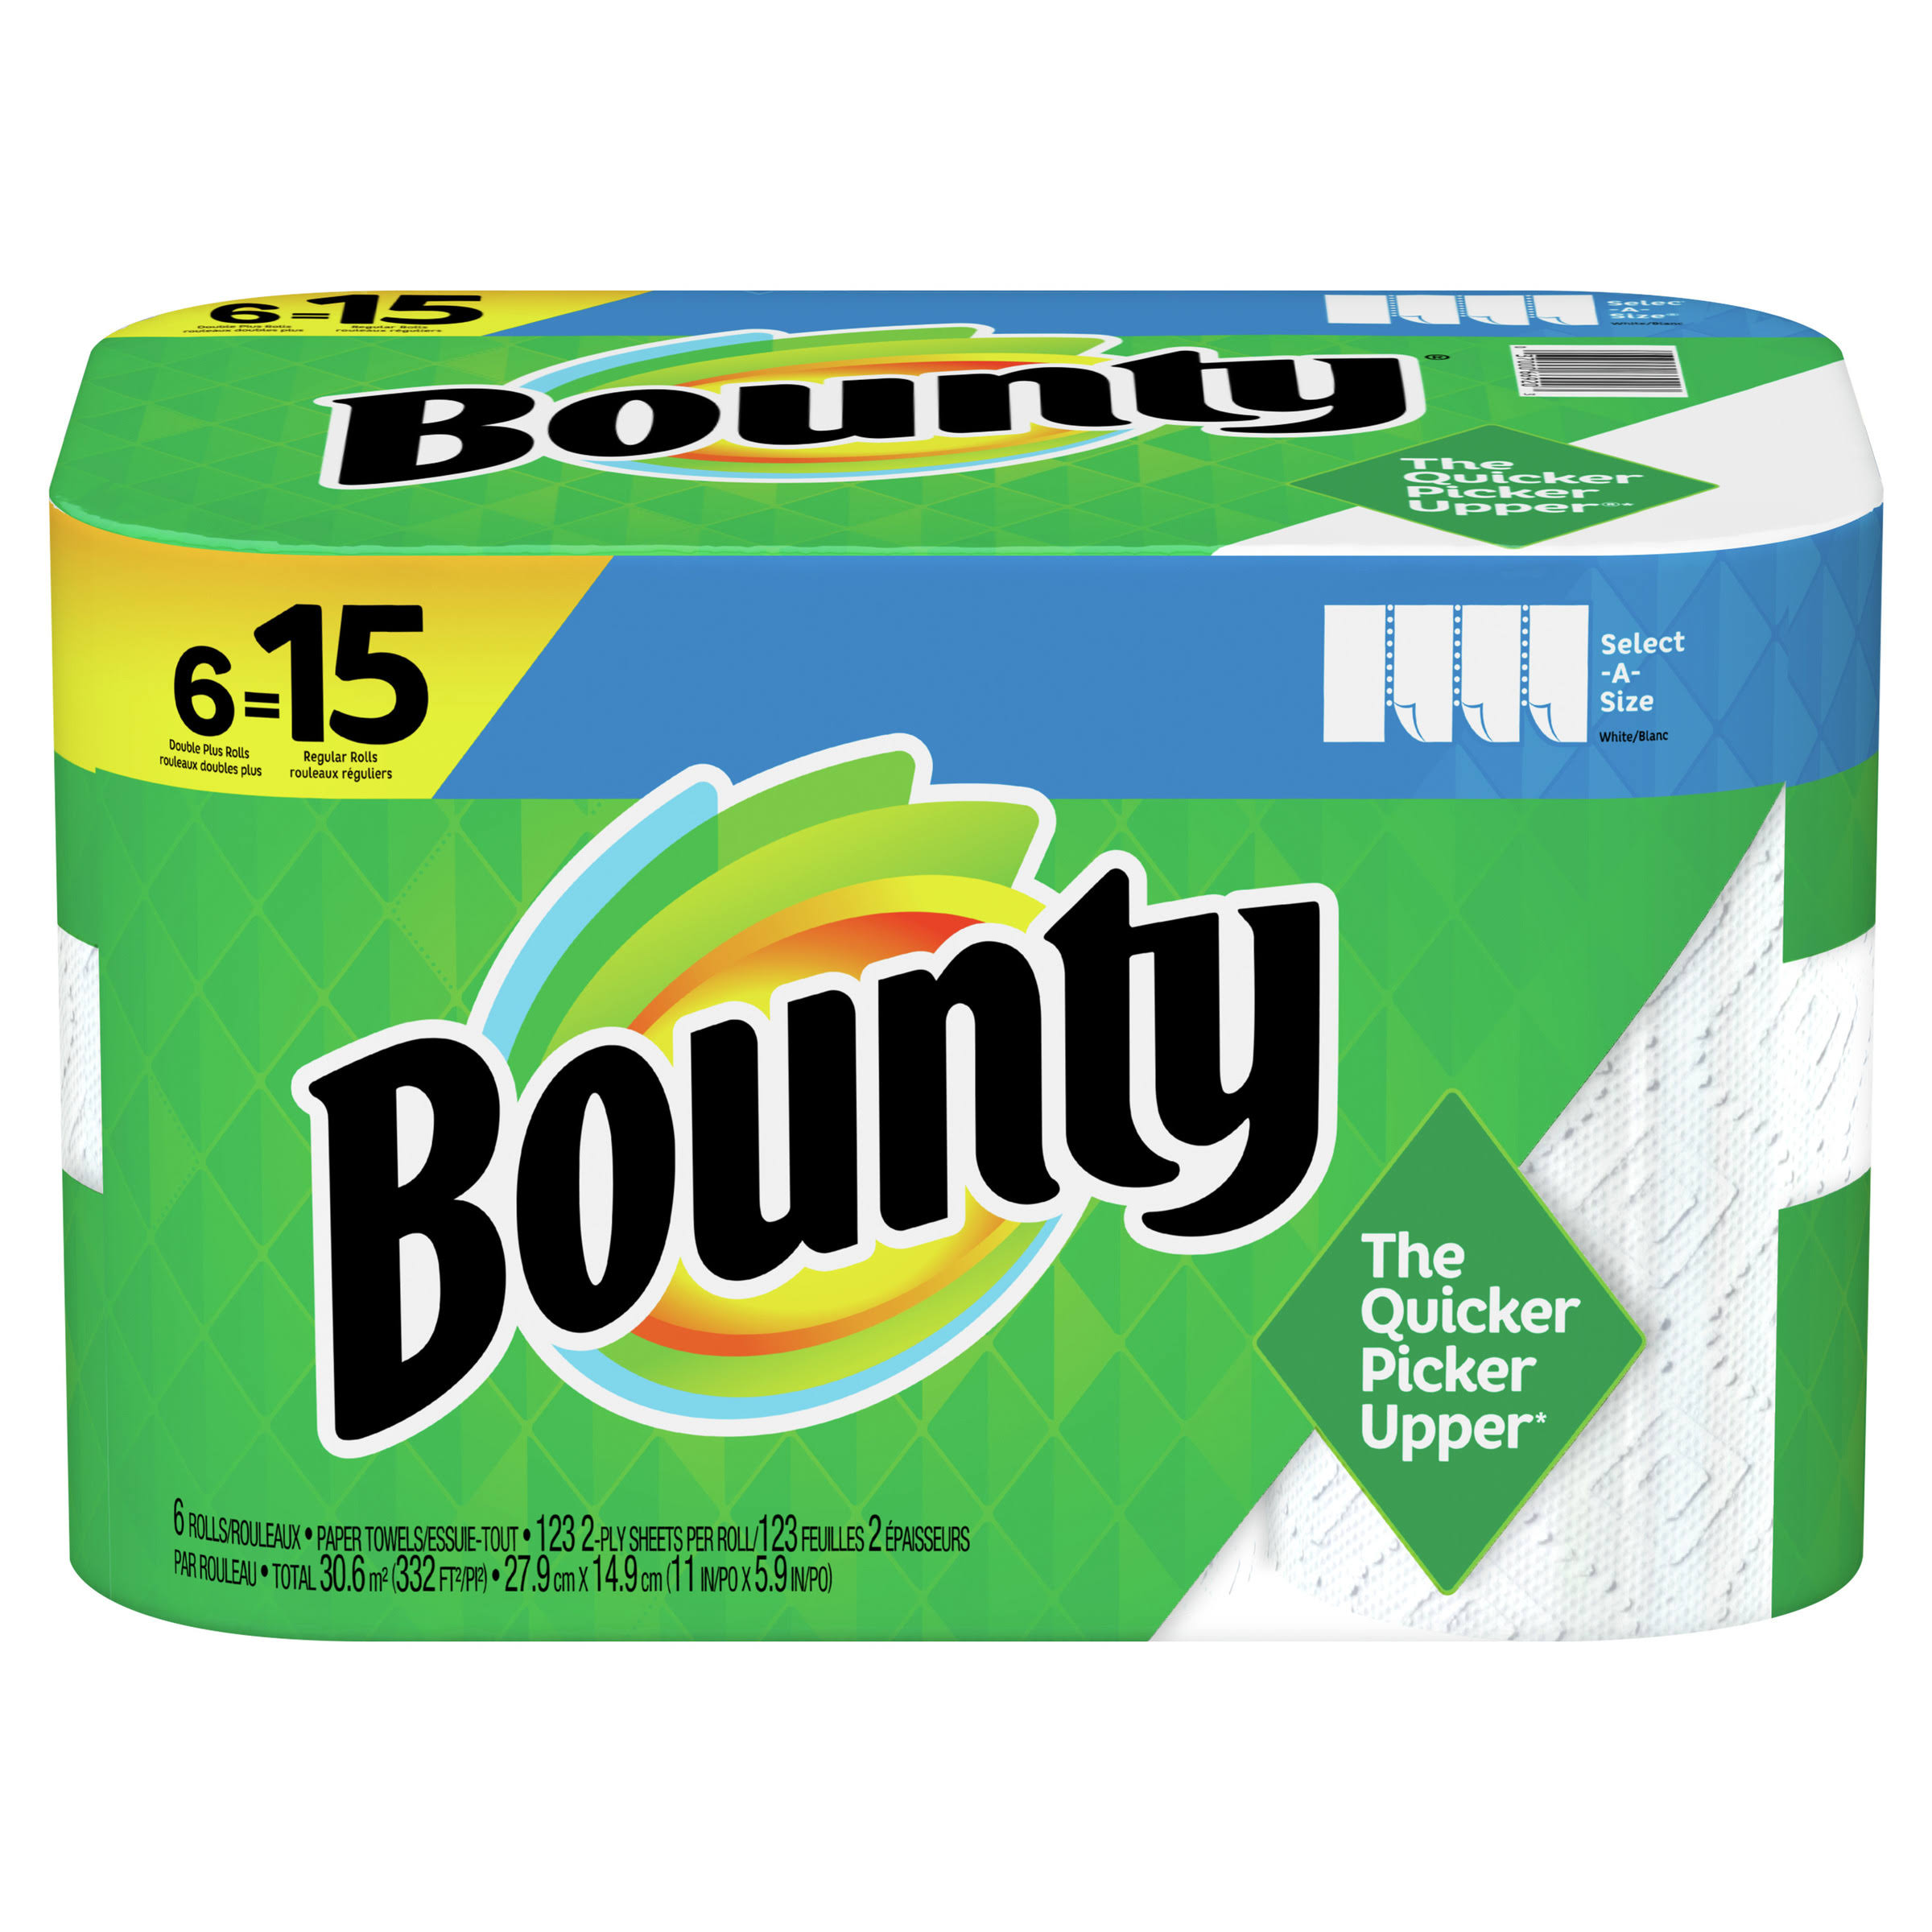 Bounty Paper Towels, Select-A-Size, Double Plus Rolls, White, 2-Ply - 6 rolls